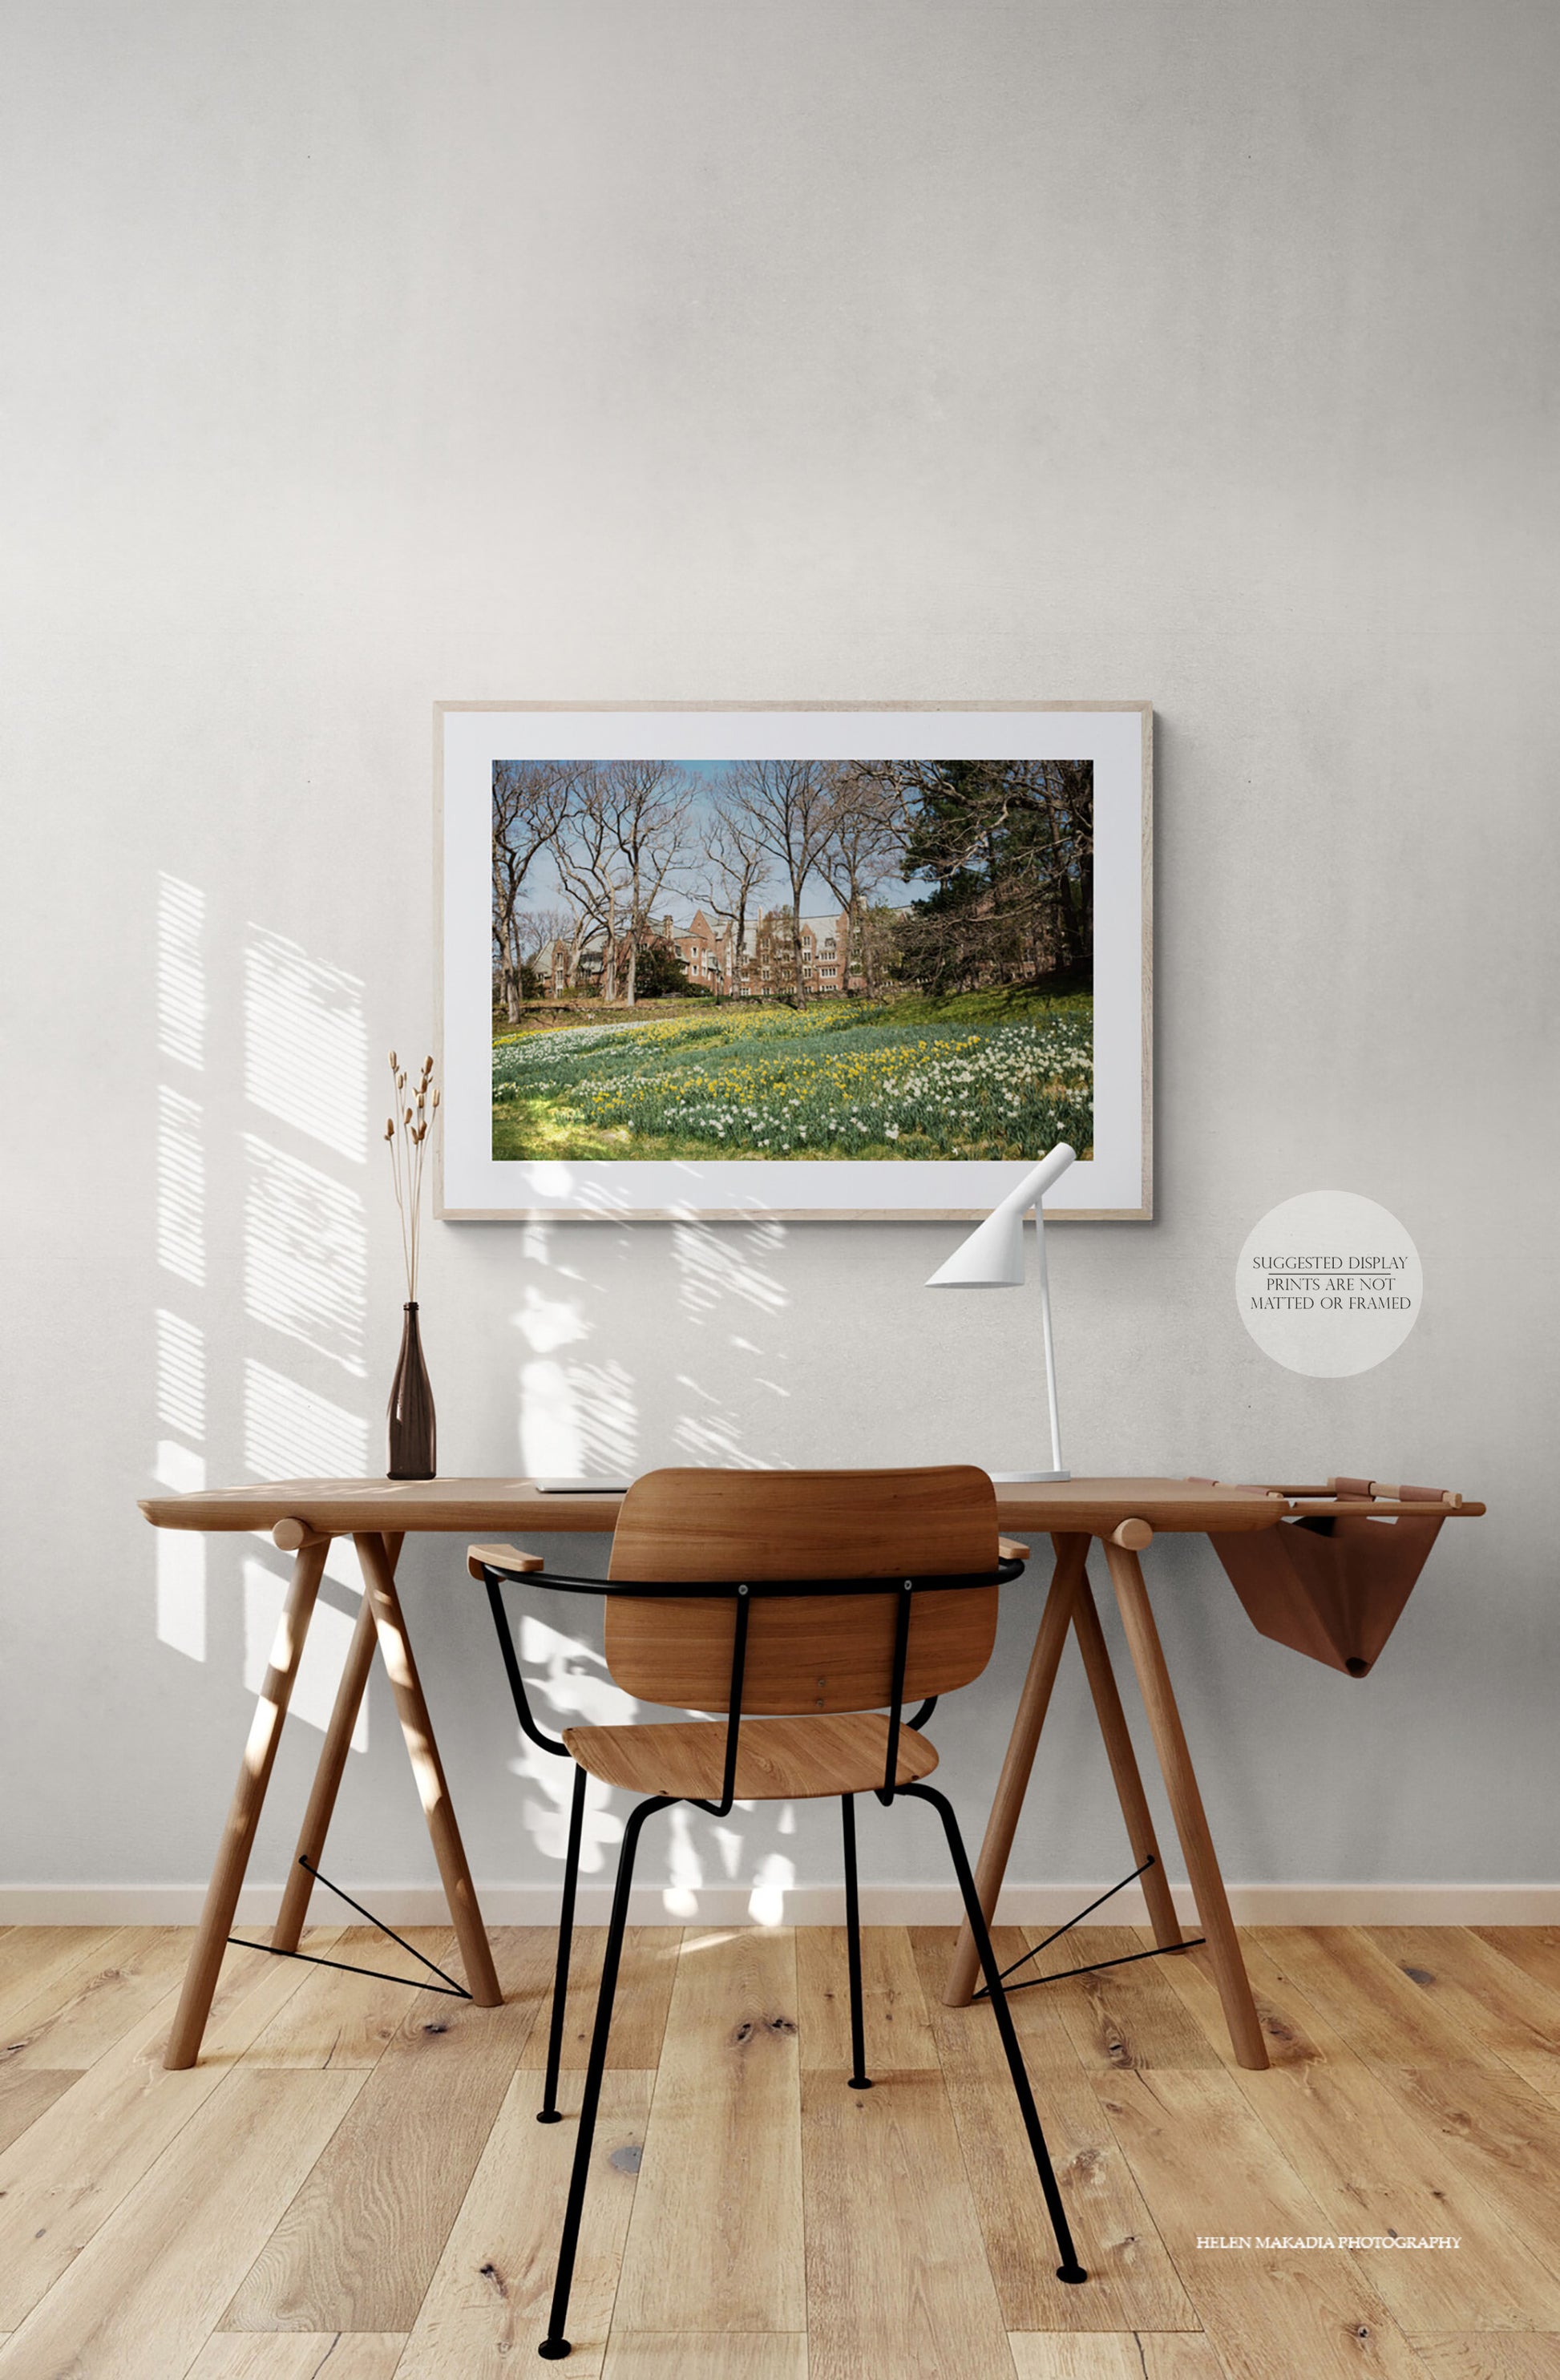 Daffodil Hill and Stone Davis at Wellesley College Photograph as Framed Wall Art in an Home Office